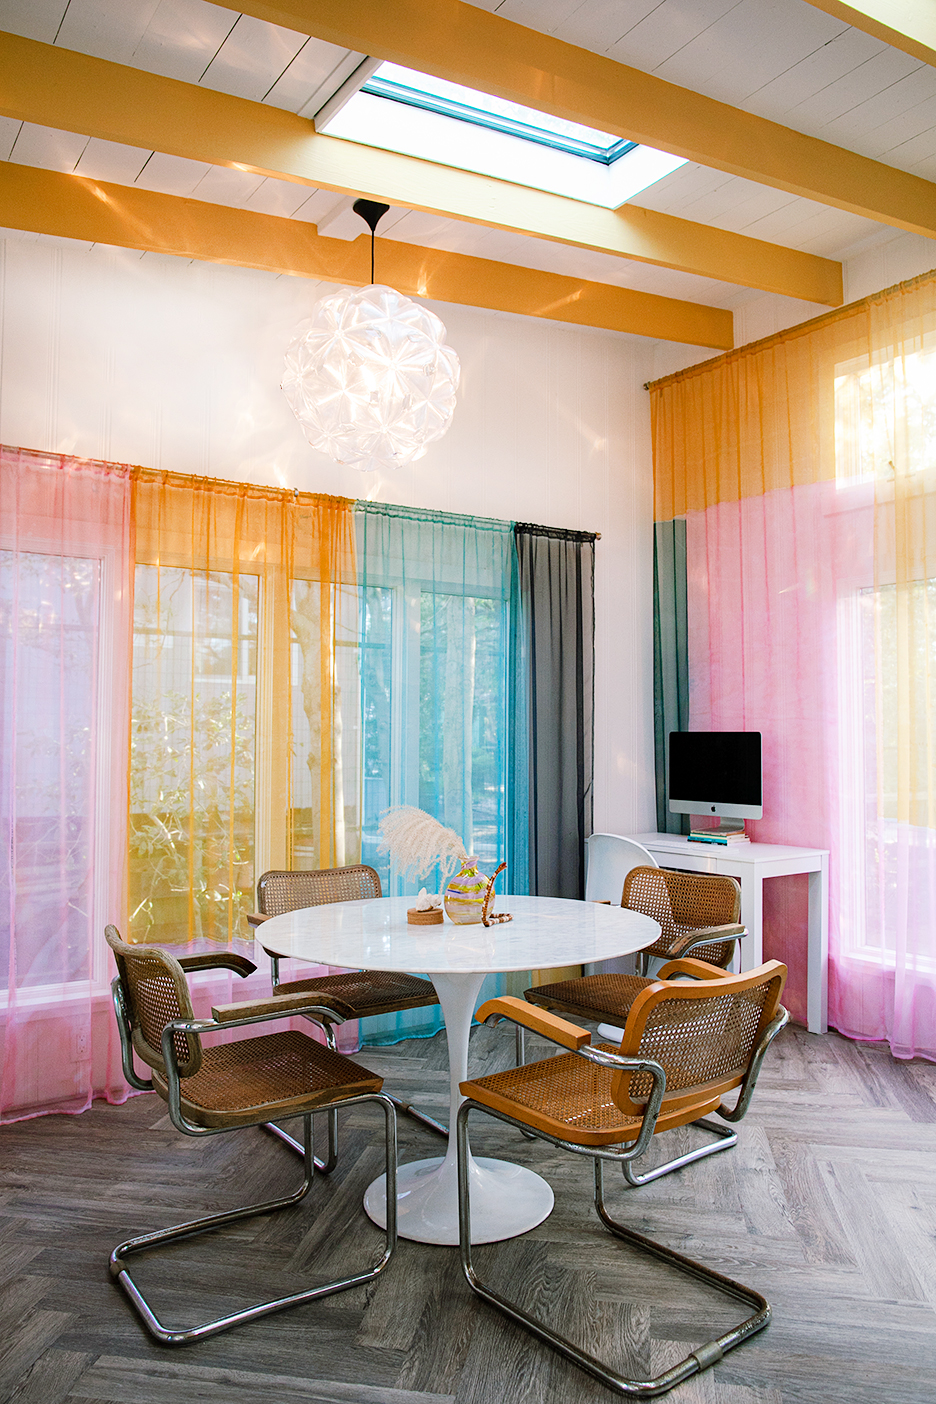 Dining room with tulip table and rainbow curtains